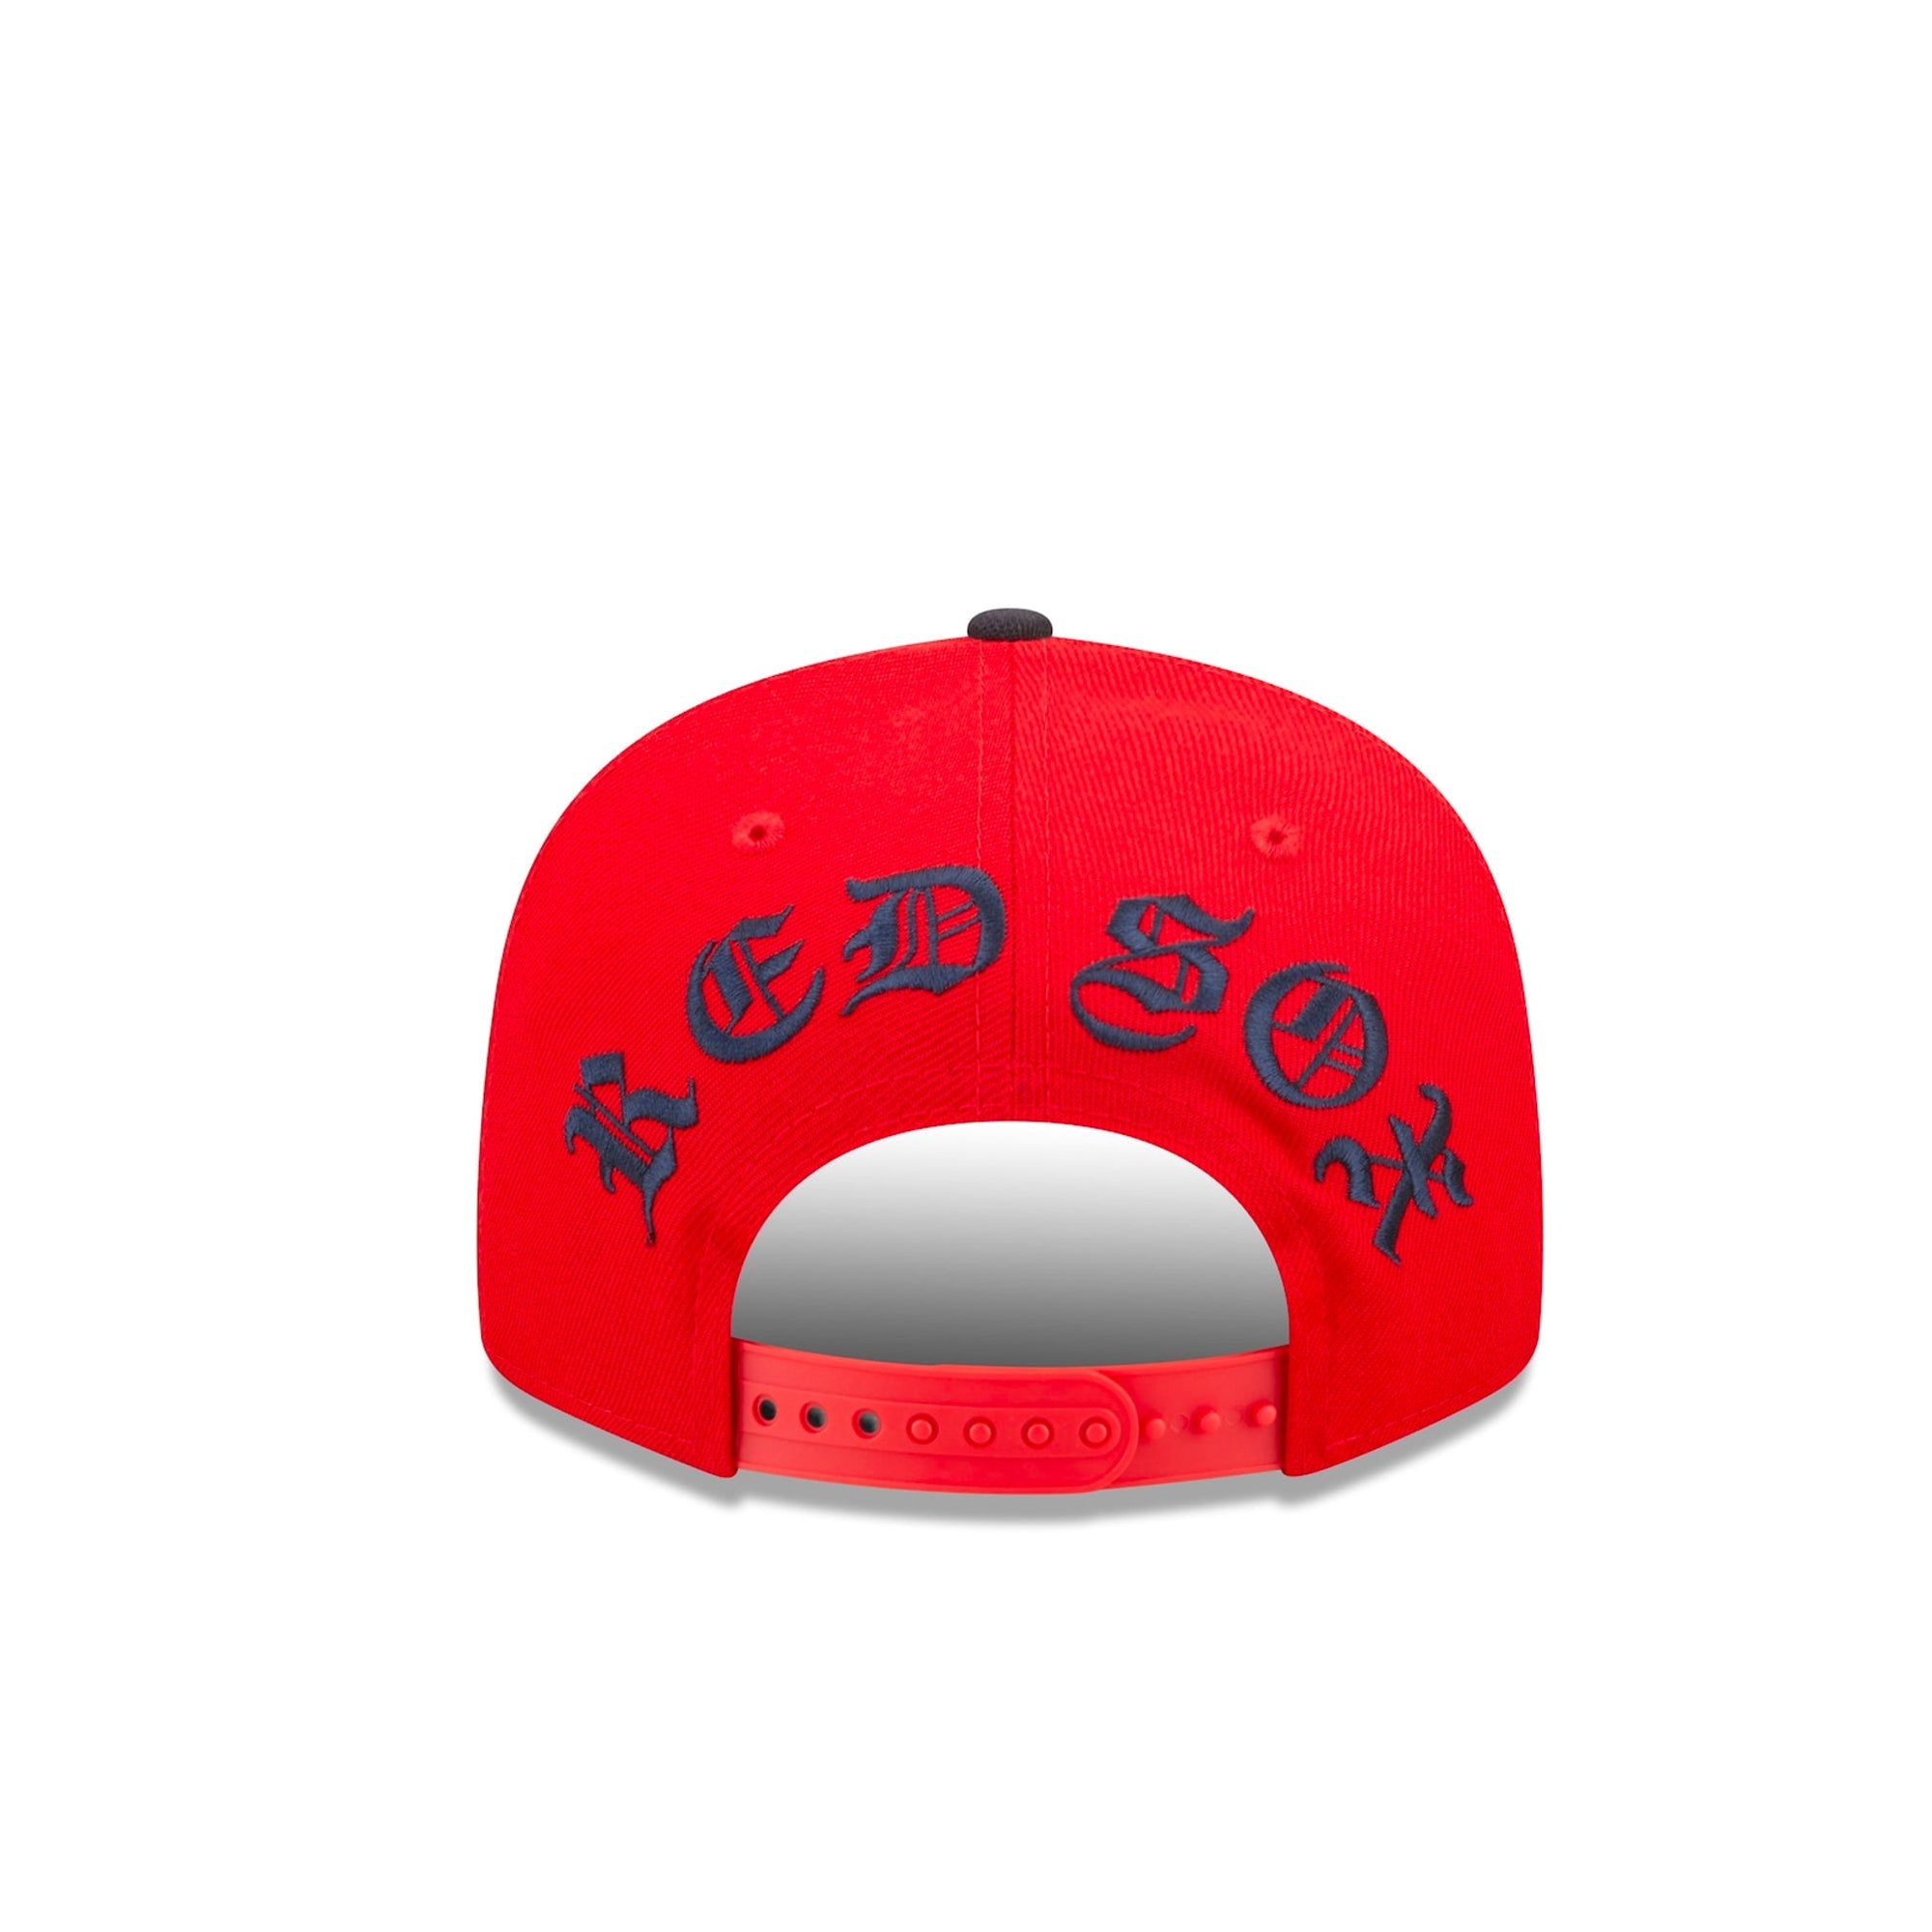 New Era Backletter Arch 9FIFTY Boston Red Sox Snapback Hat